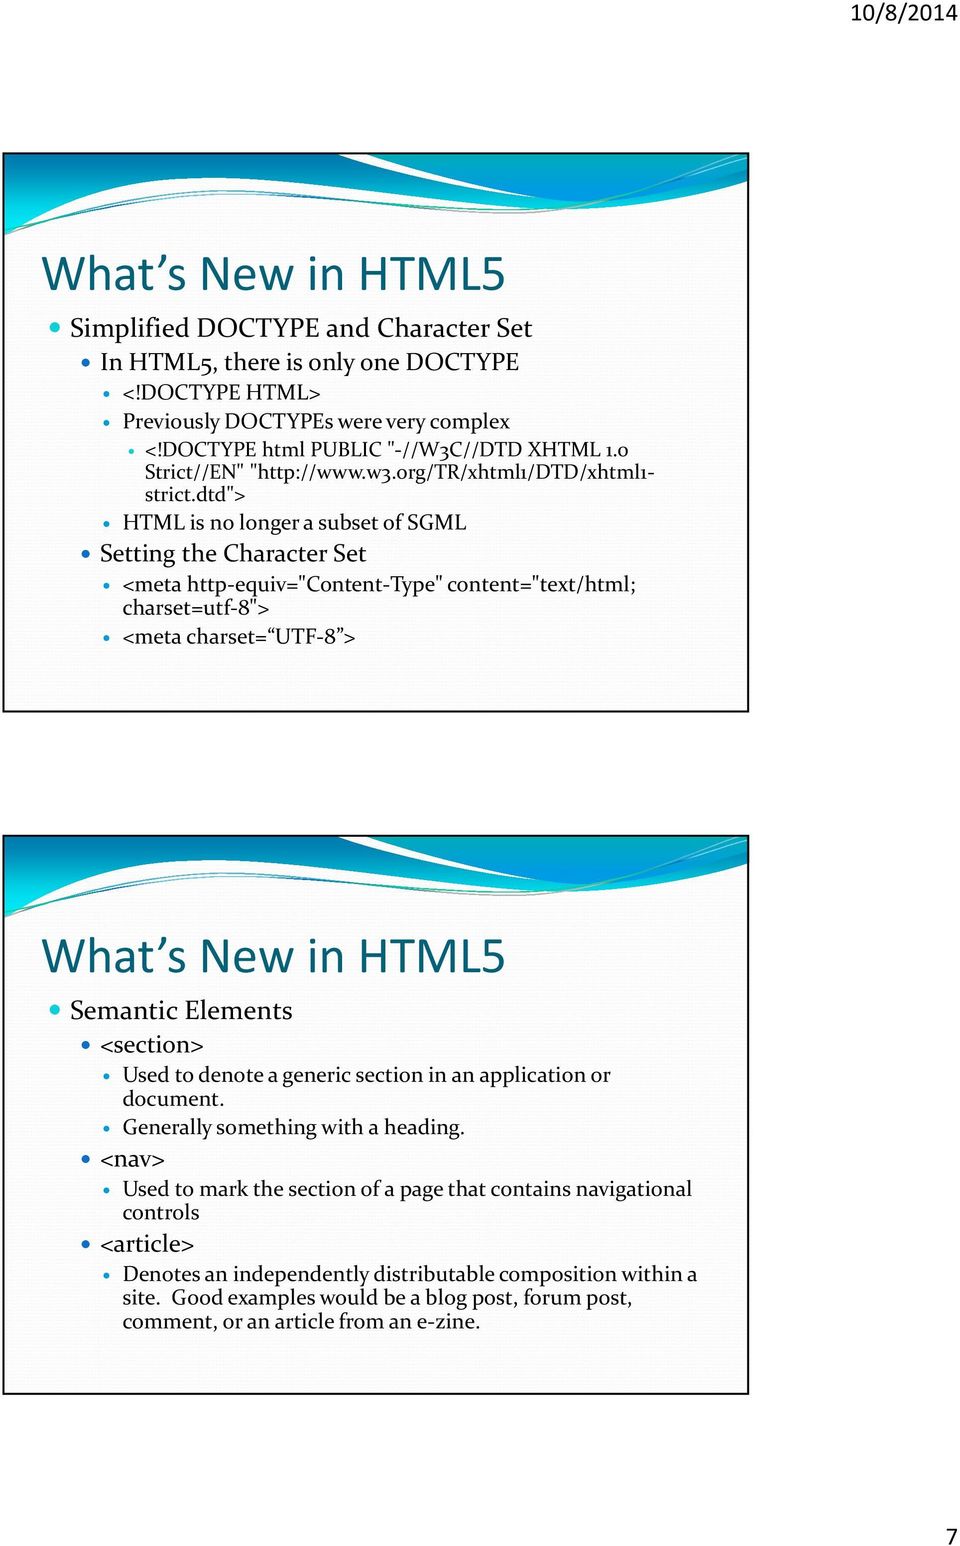 dtd"> HTML is no longer a subset of SGML Setting the Character Set <meta http-equiv="content-type" content="text/html; charset=utf-8"> <meta charset= UTF-8 > Semantic Elements <section>